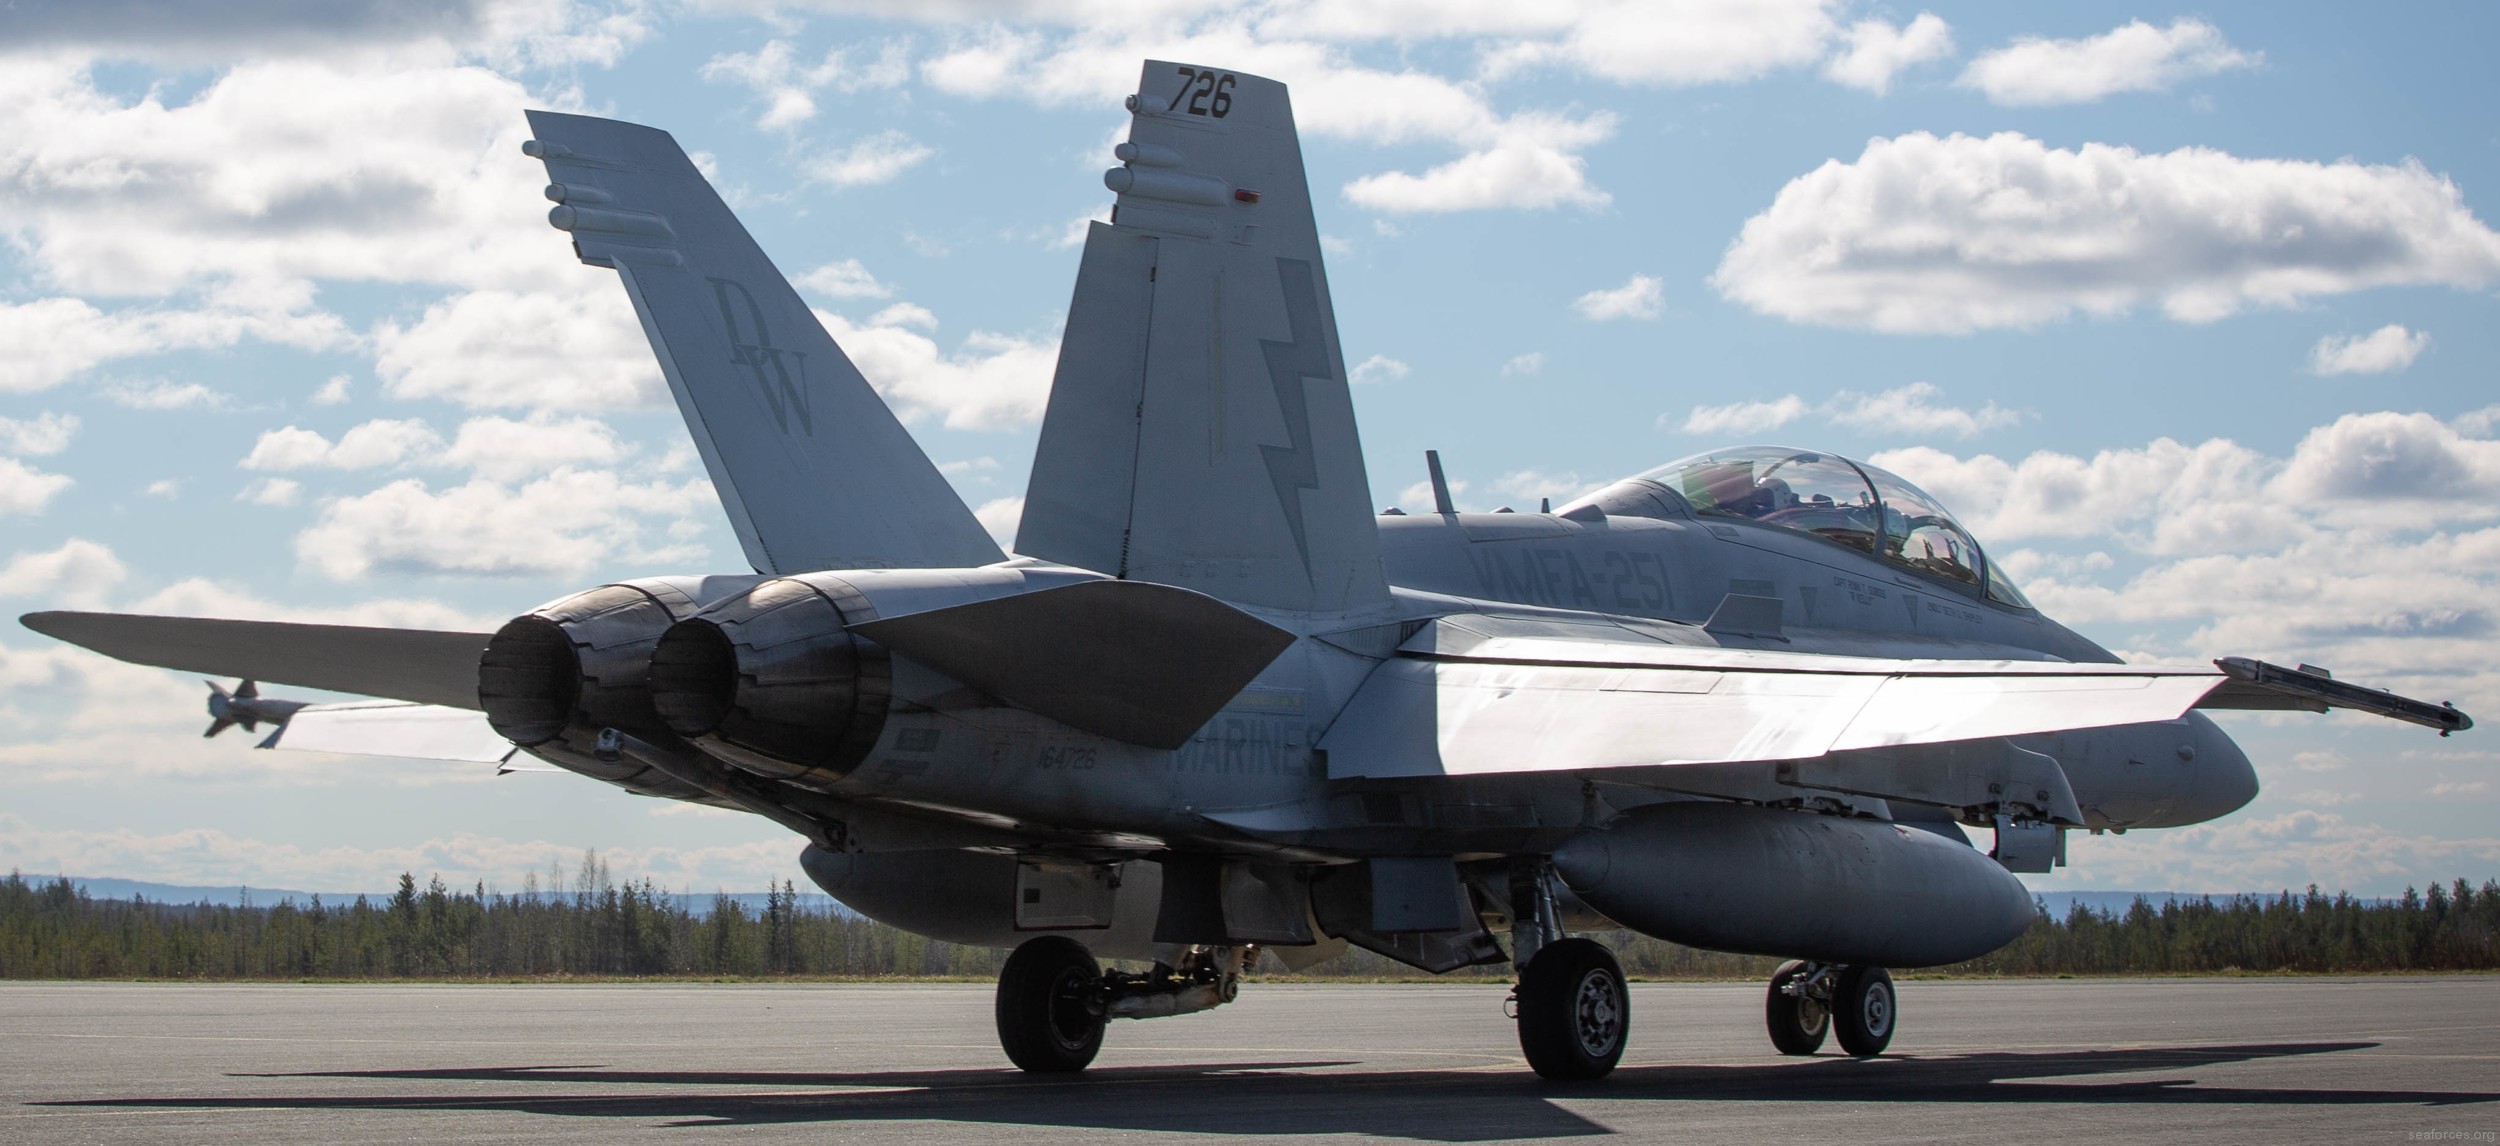 vmfa-251 thunderbolts marine fighter attack squadron f/a-18d hornet 87 exercise bold quest 2019 finland